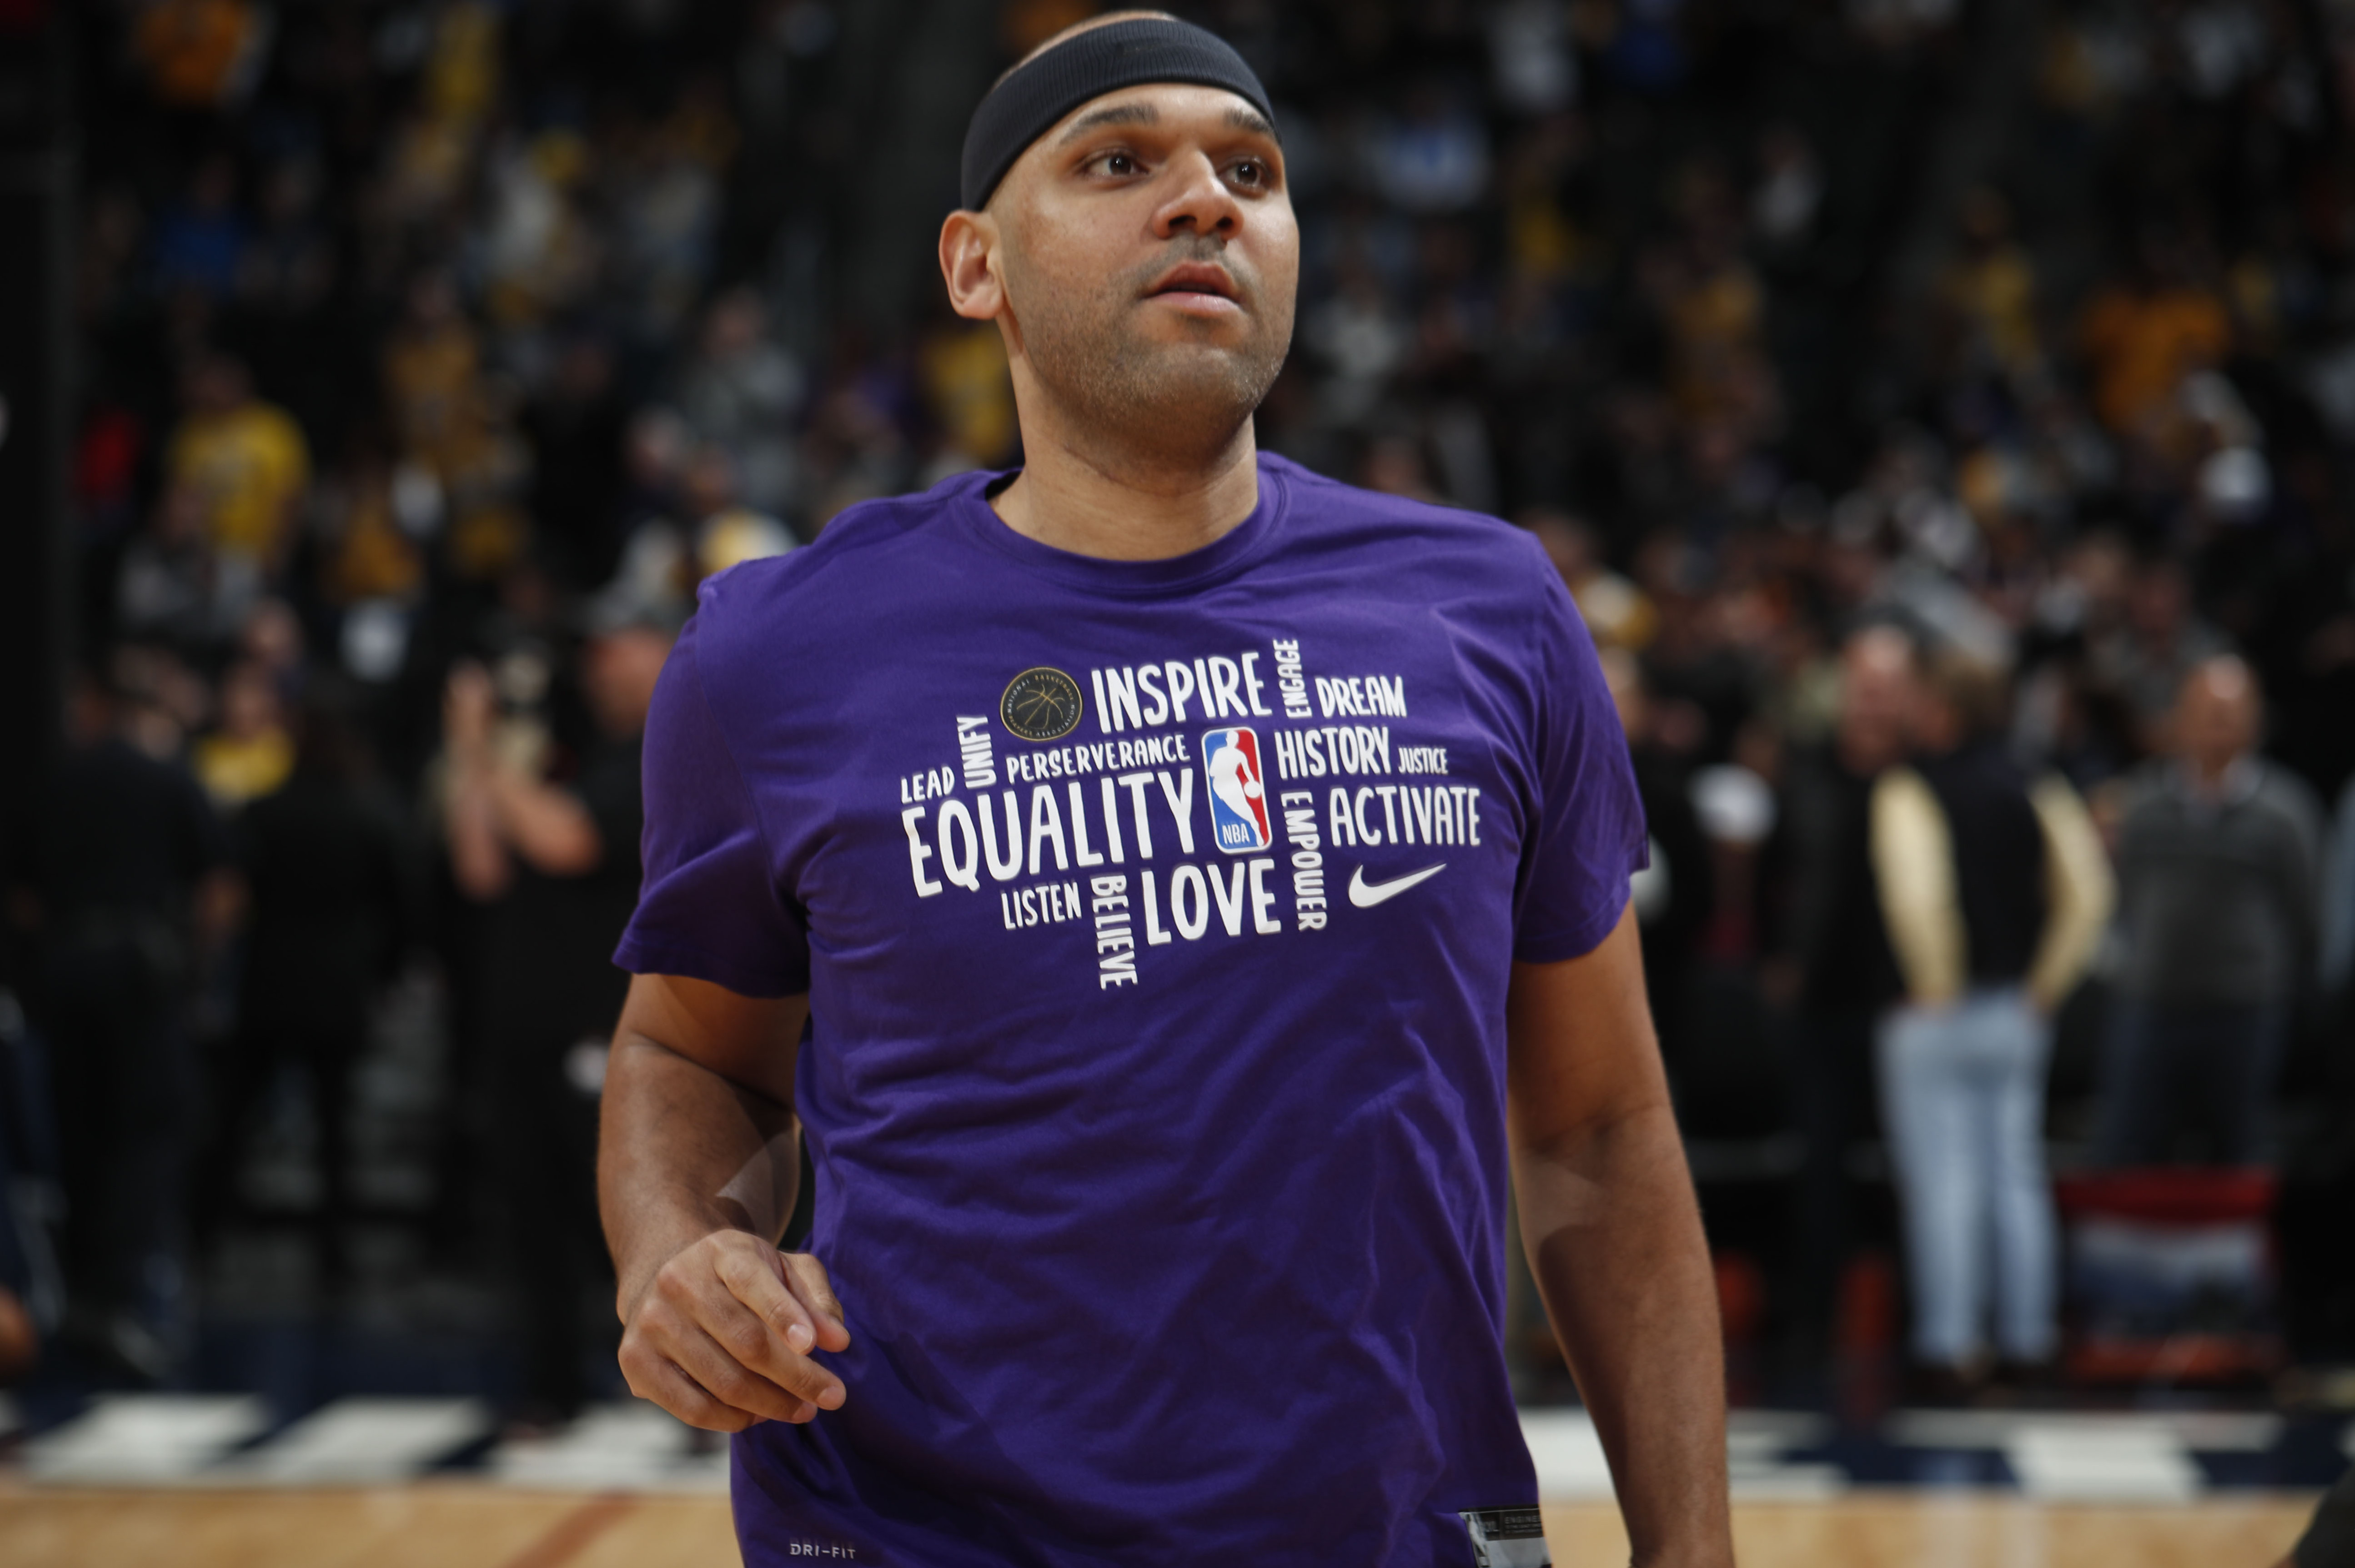 NBA A to Z: Jared Dudley on free agency, criticism of today's game